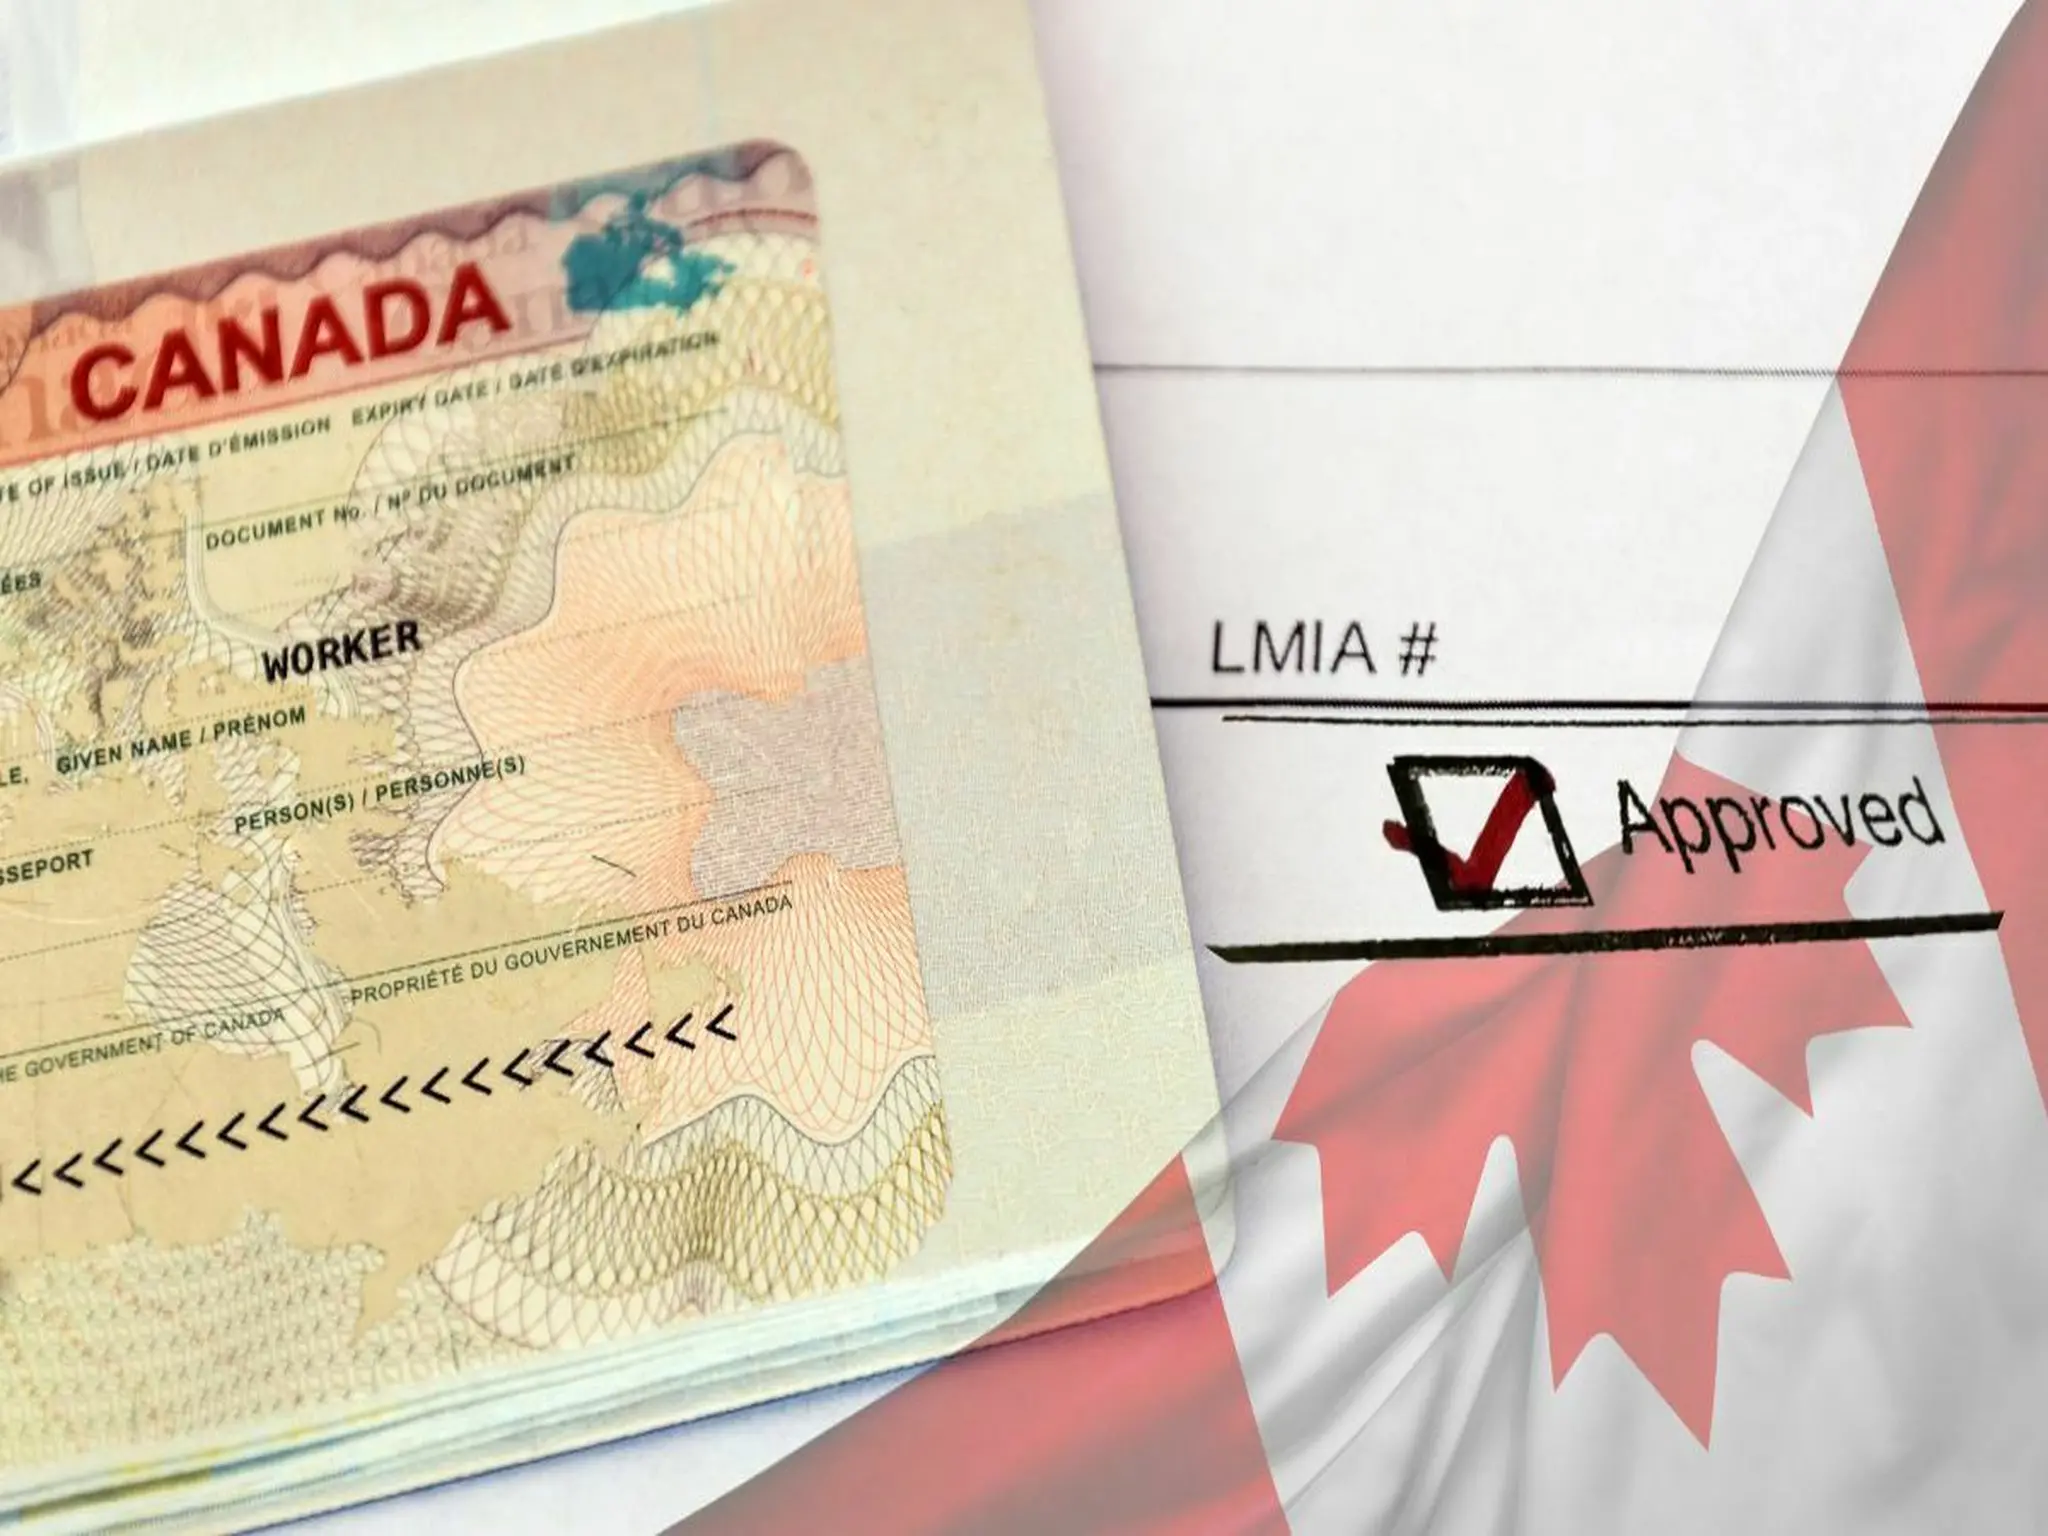 Canada sets LMIA application prerequisites for Canadian work permitsmits